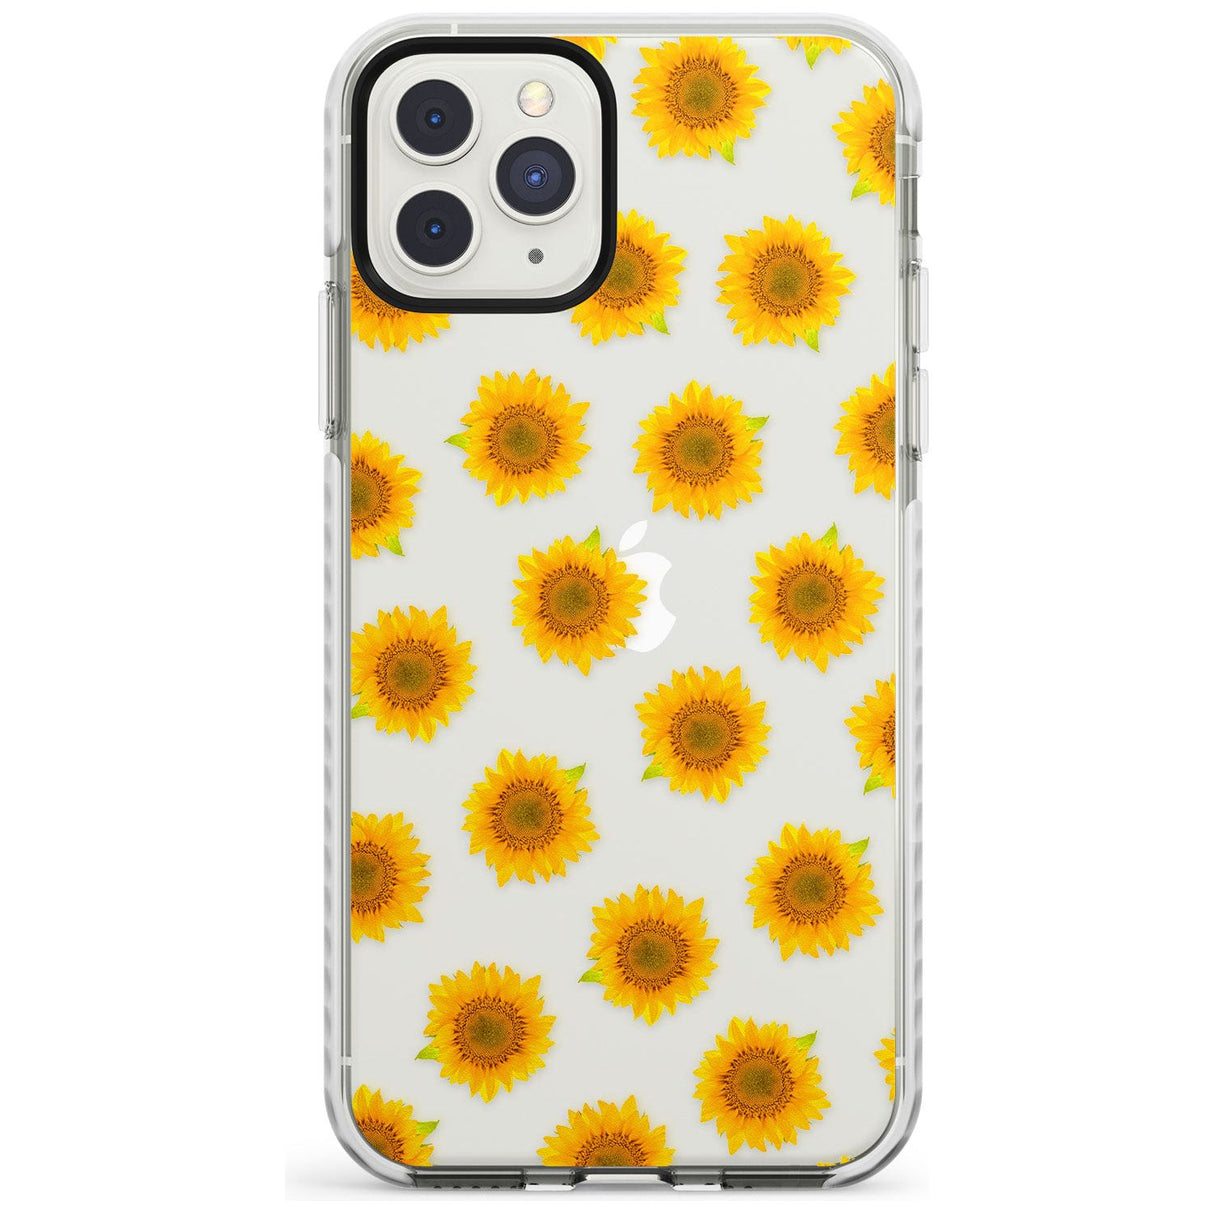 Sunflowers Transparent Pattern Impact Phone Case for iPhone 11 Pro Max